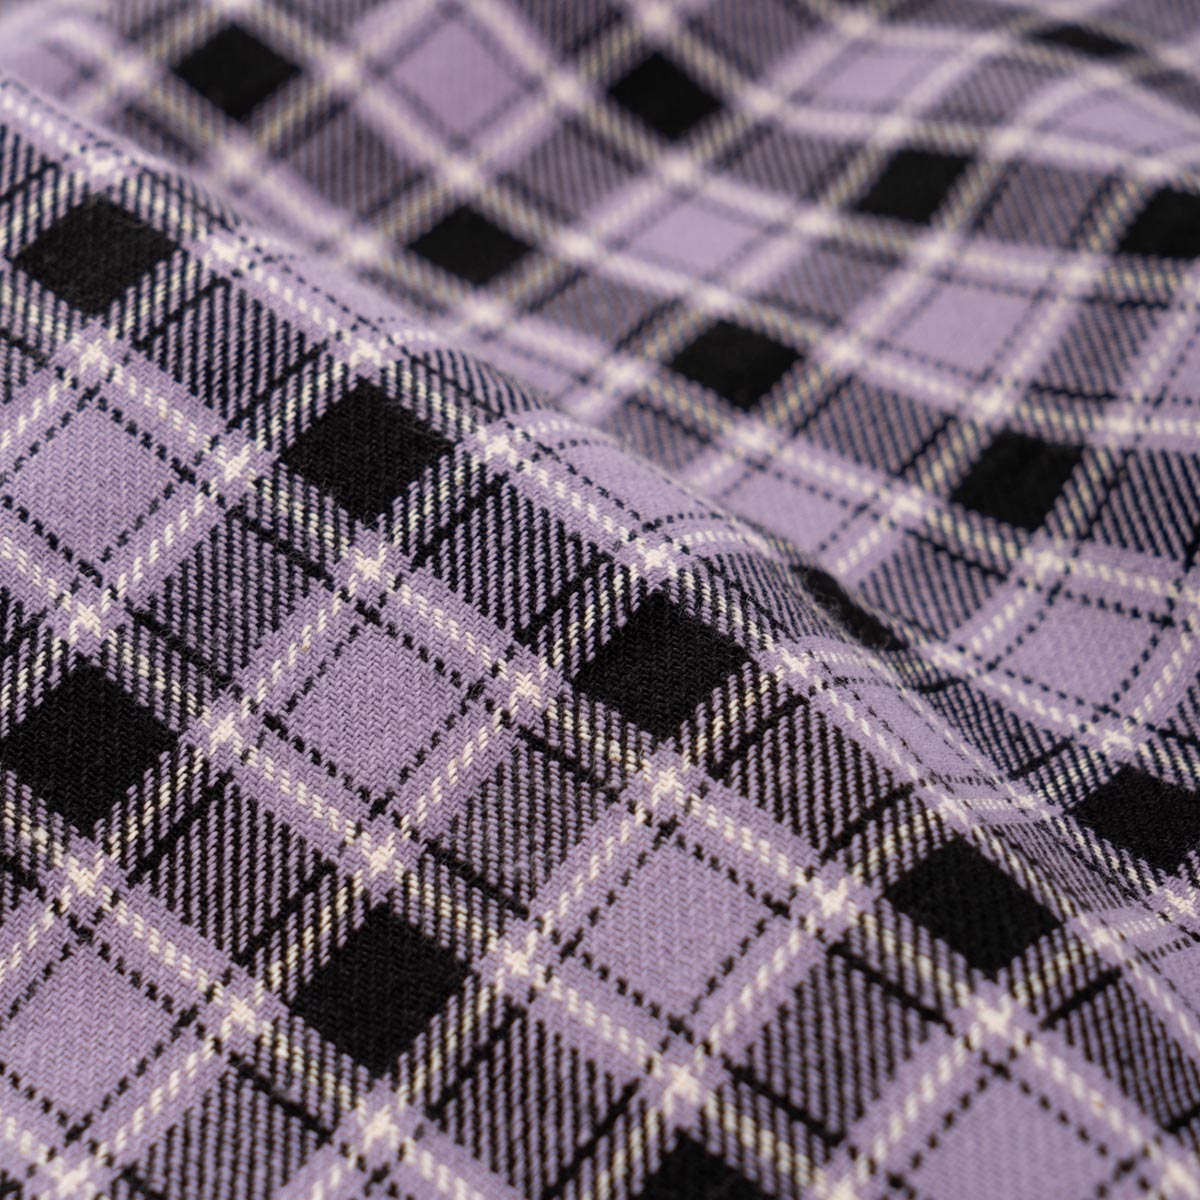 Welcome Cell Woven Plaid Zip Shirt - Lavender Grey image 5